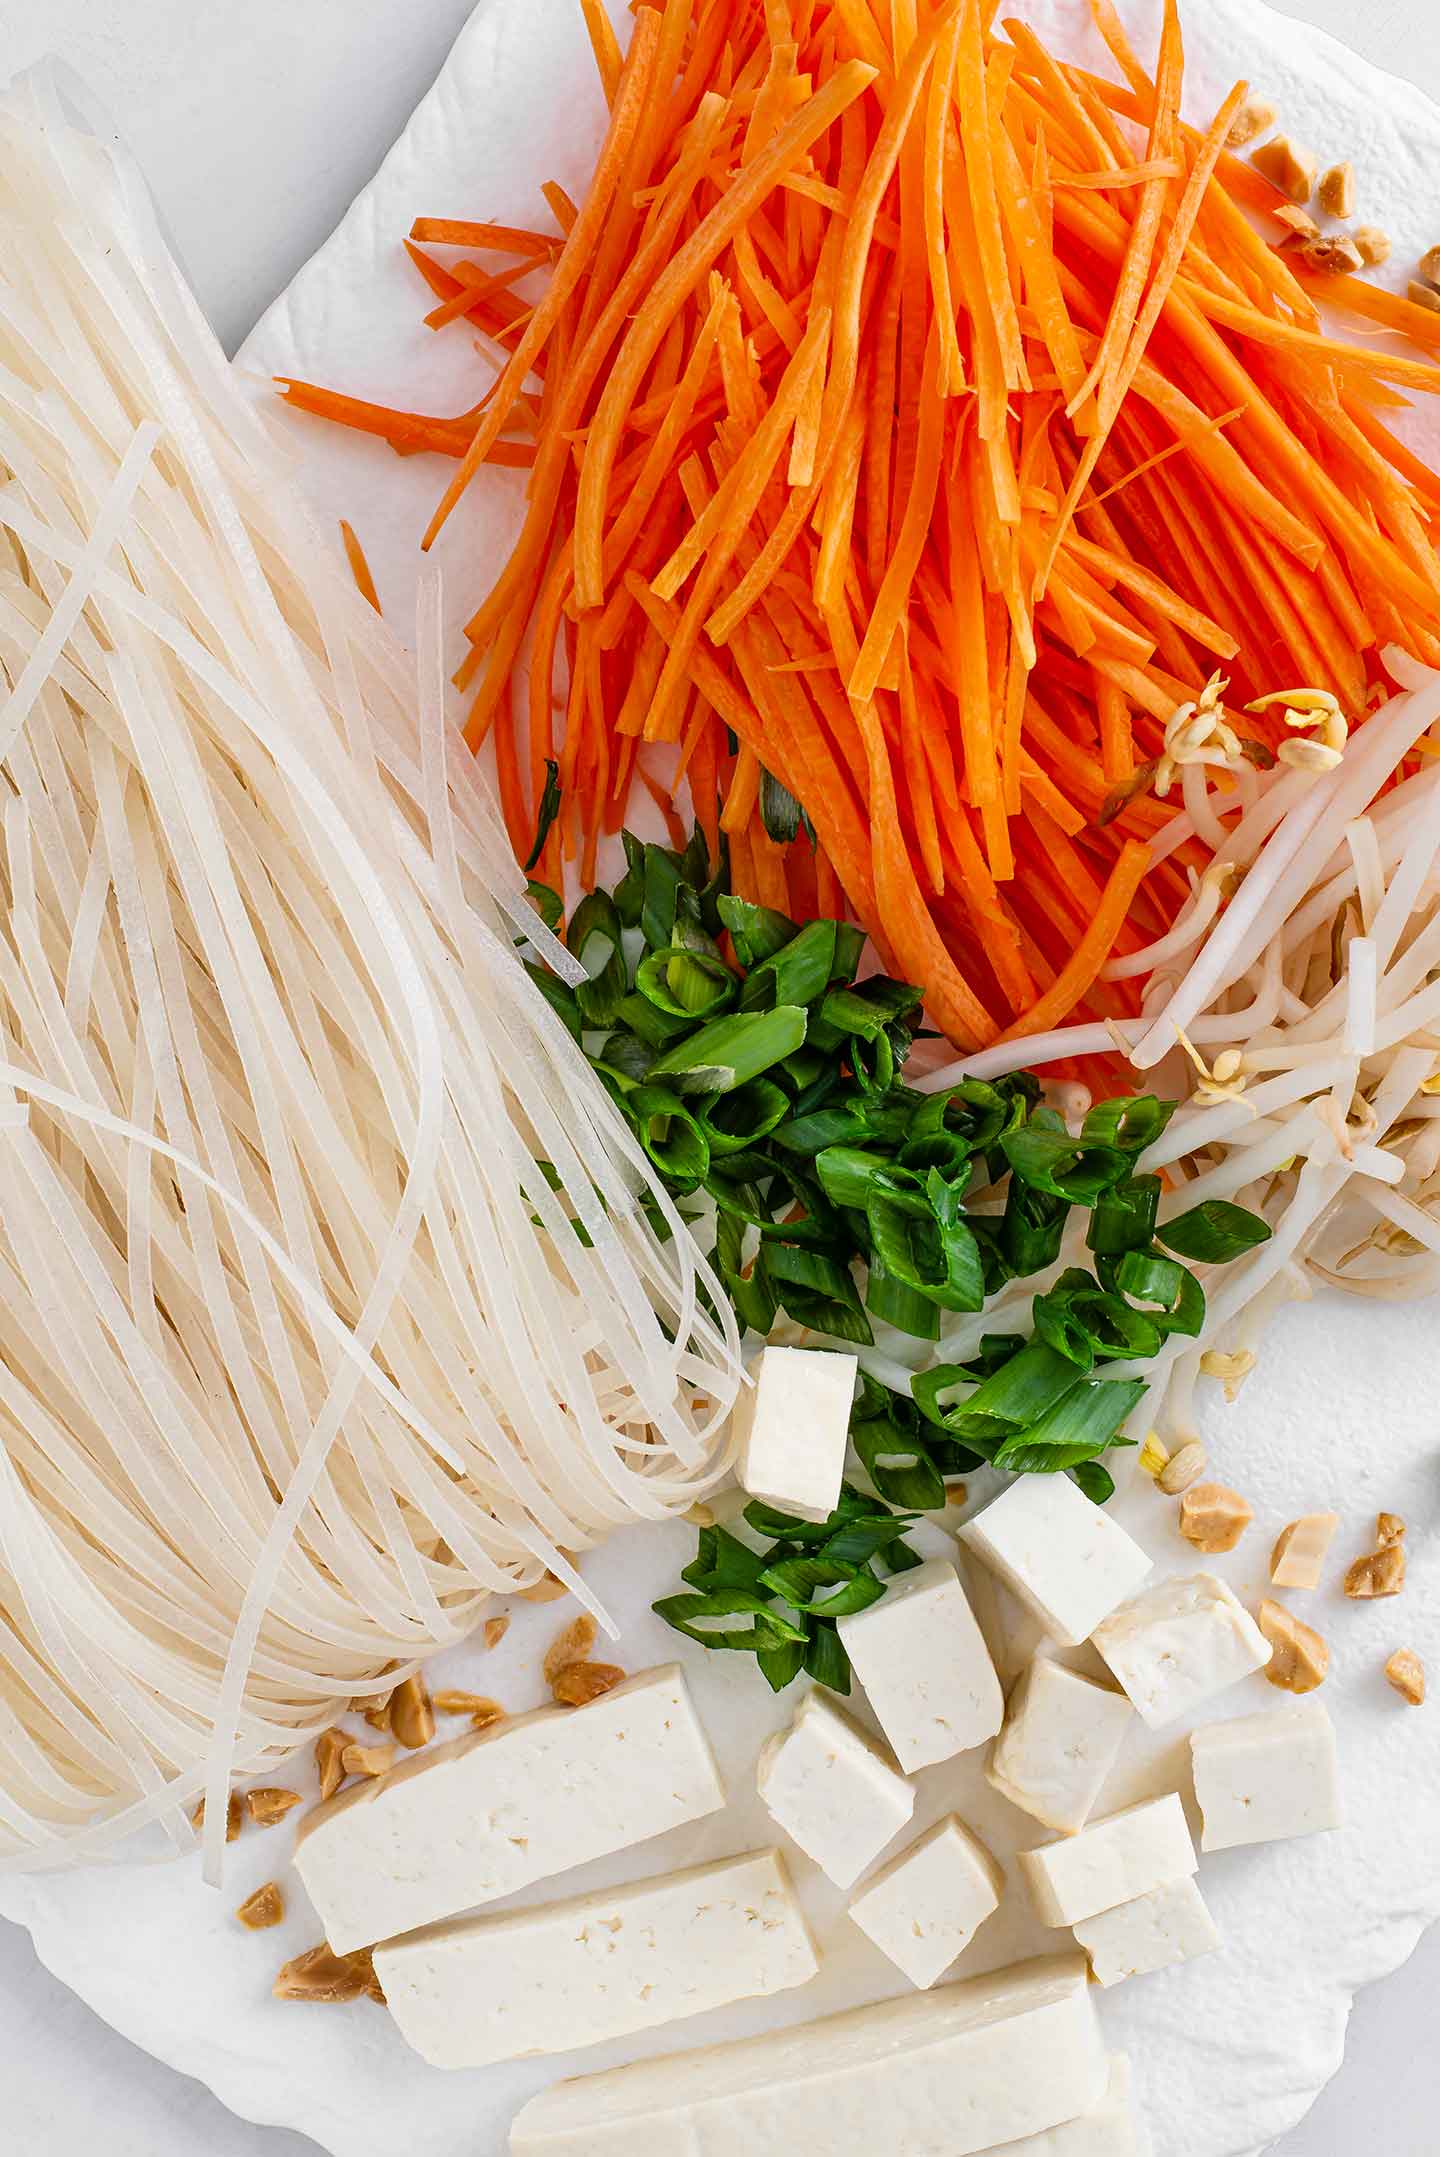 Top down view of julienned carrots, dry rice noodles, sliced green onion, bean sprouts, and cubed tofu.